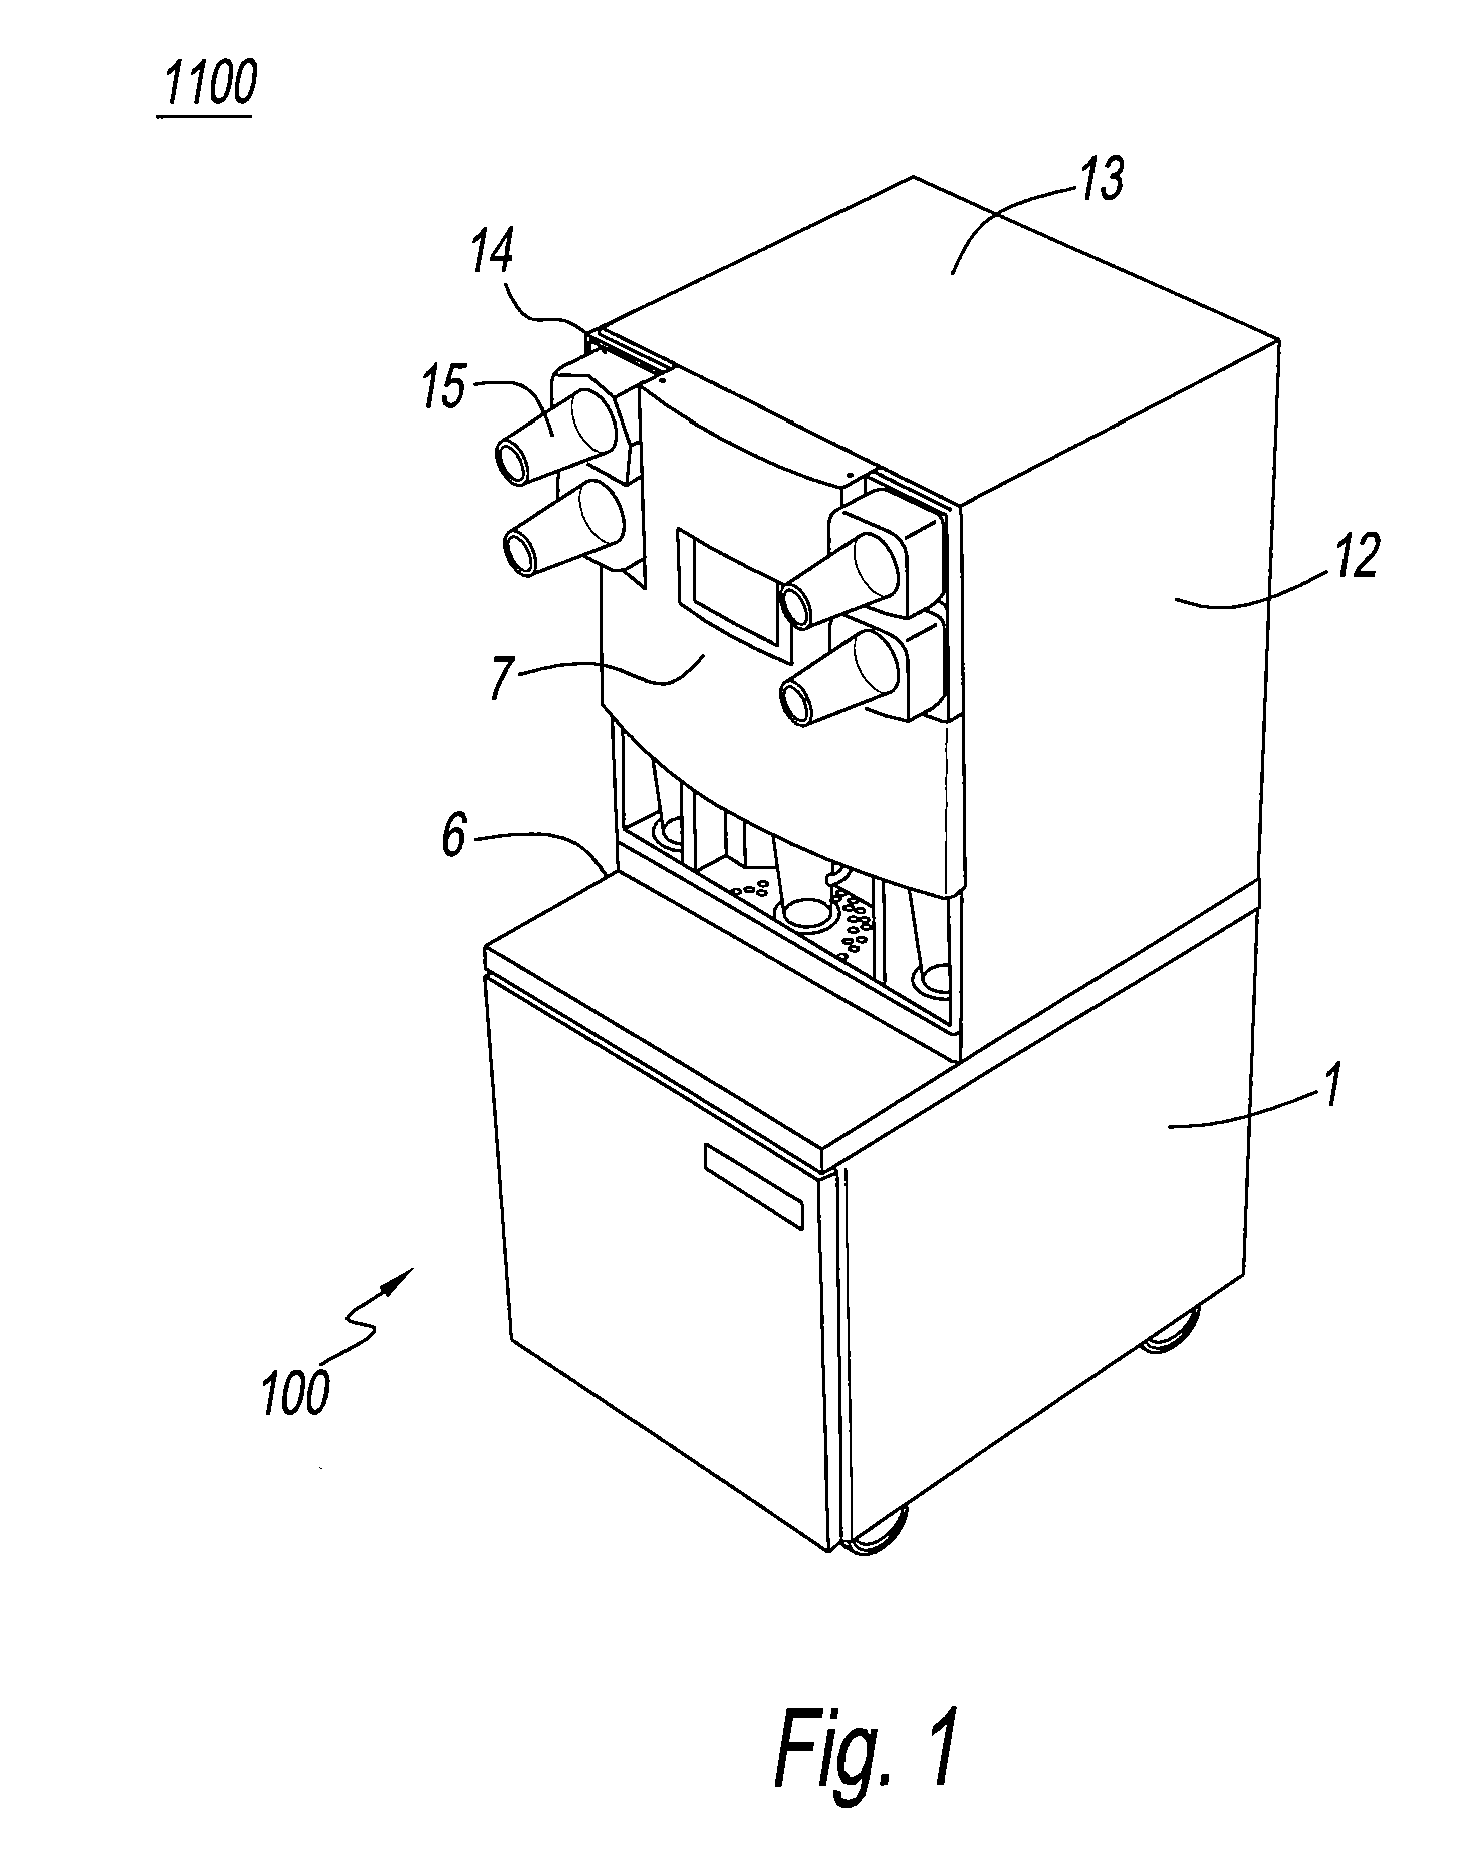 Integrated method and system for dispensing and blending/mixing beverage ingredients